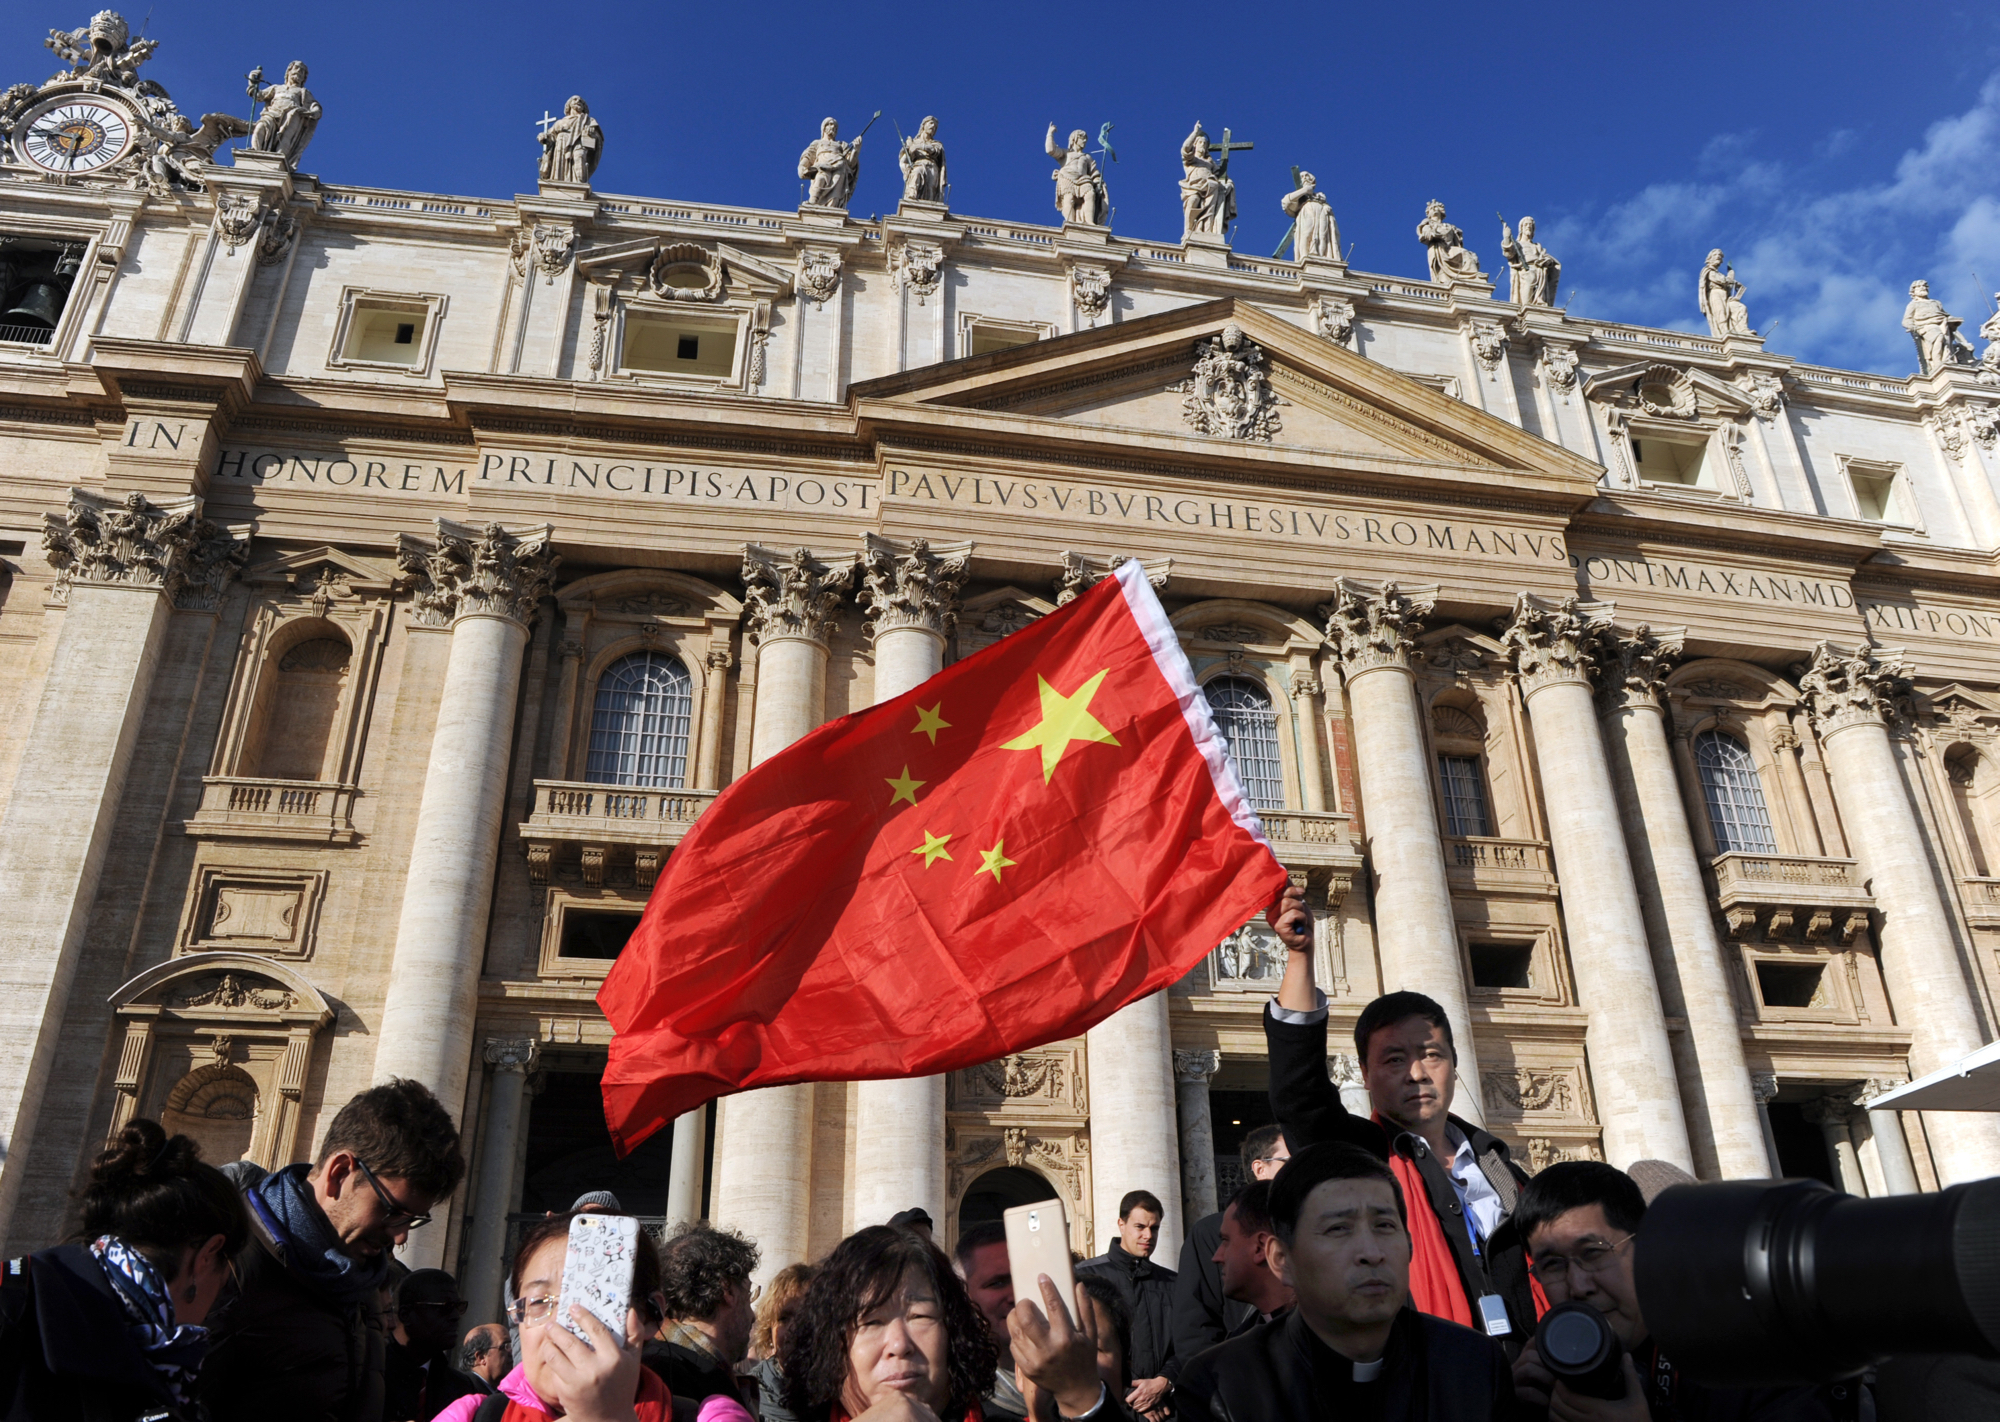 Top Catholics write open letter opposing Vatican-China deal 